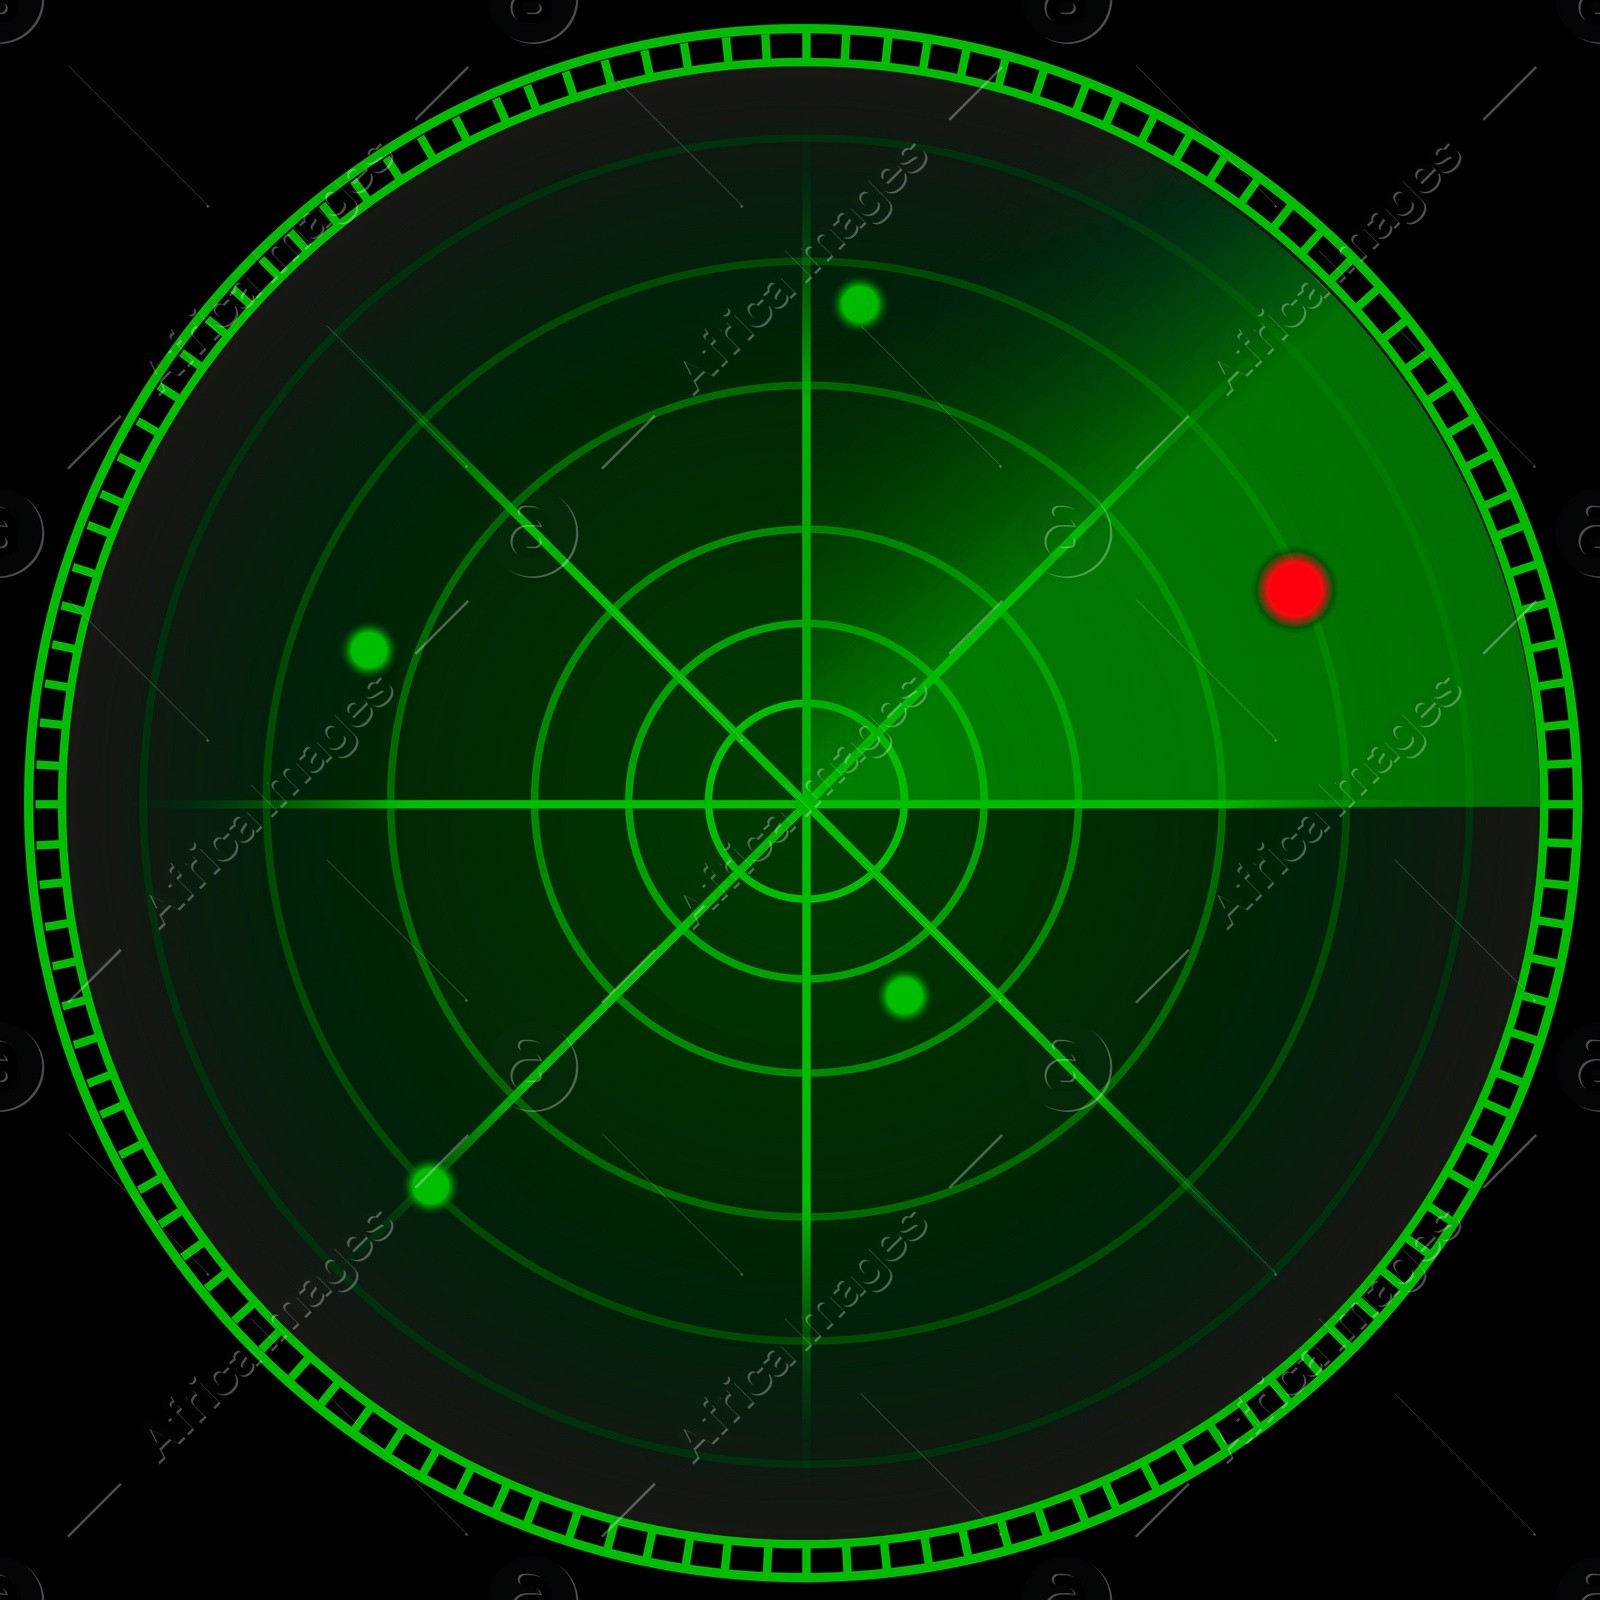 Image of Unidentified flying object. Radar screen showing red spot among green ones, illustration